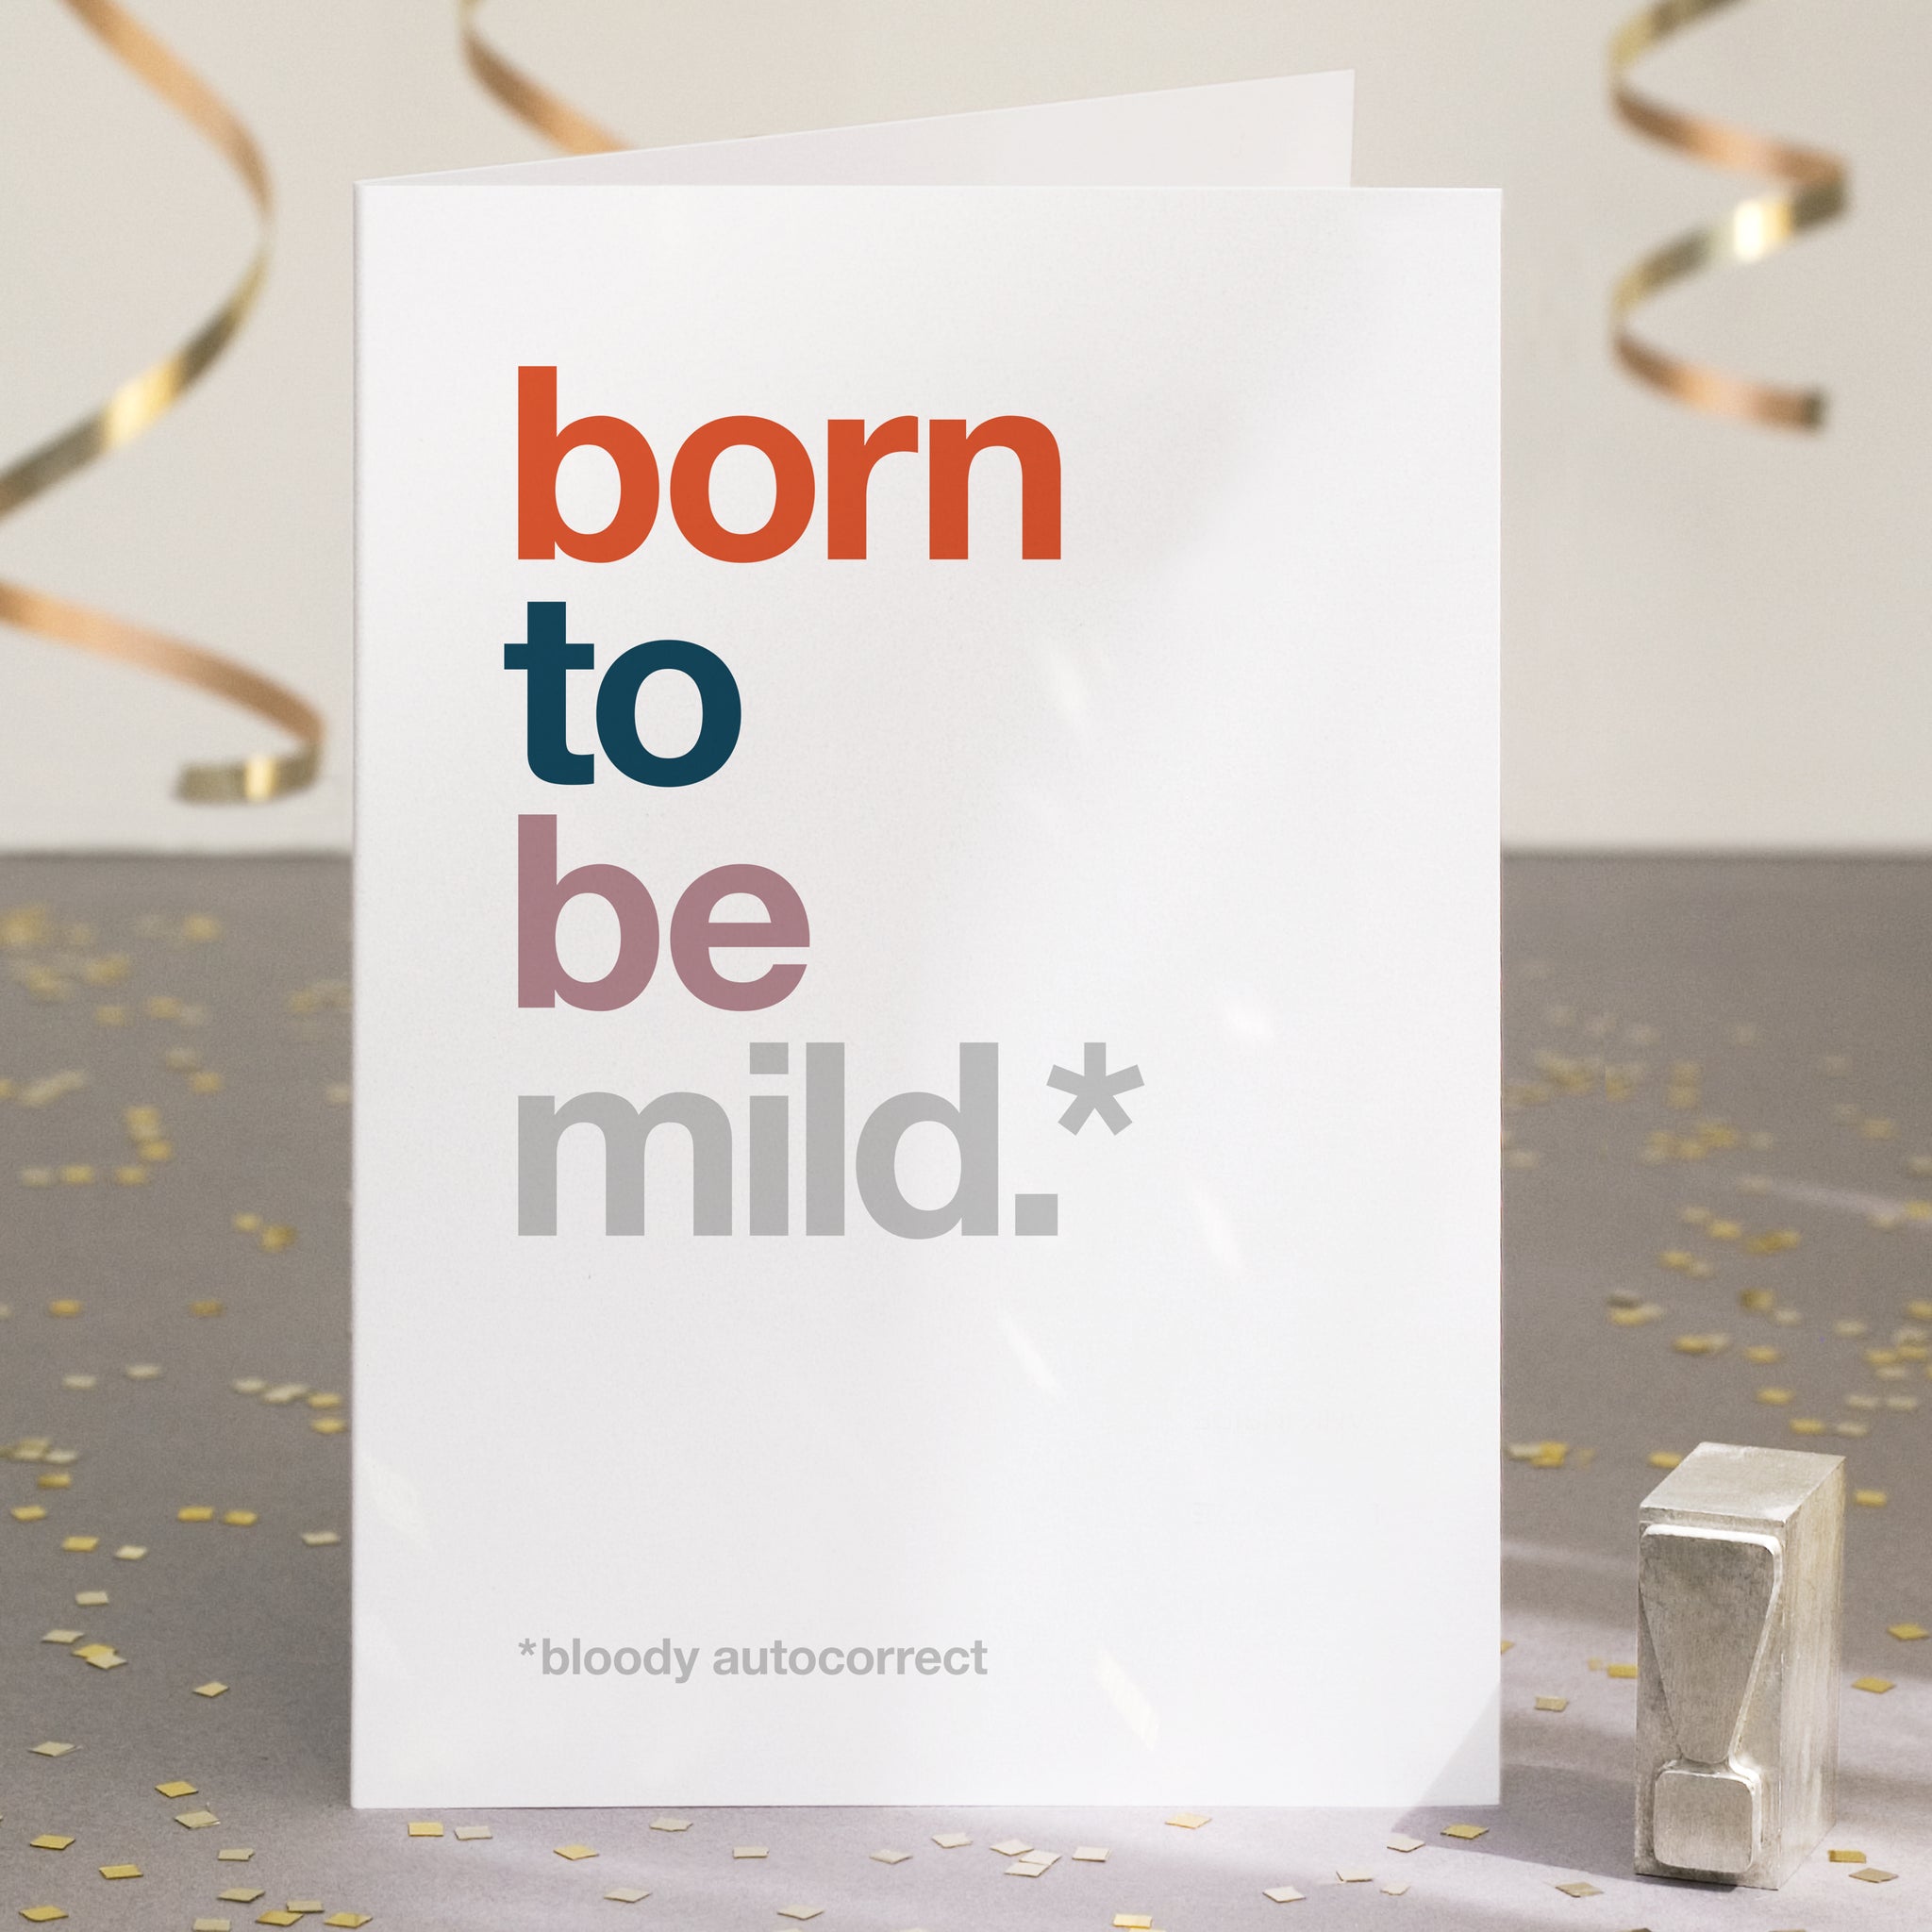 Funny birthday card autocorrected to 'born to be mild'.